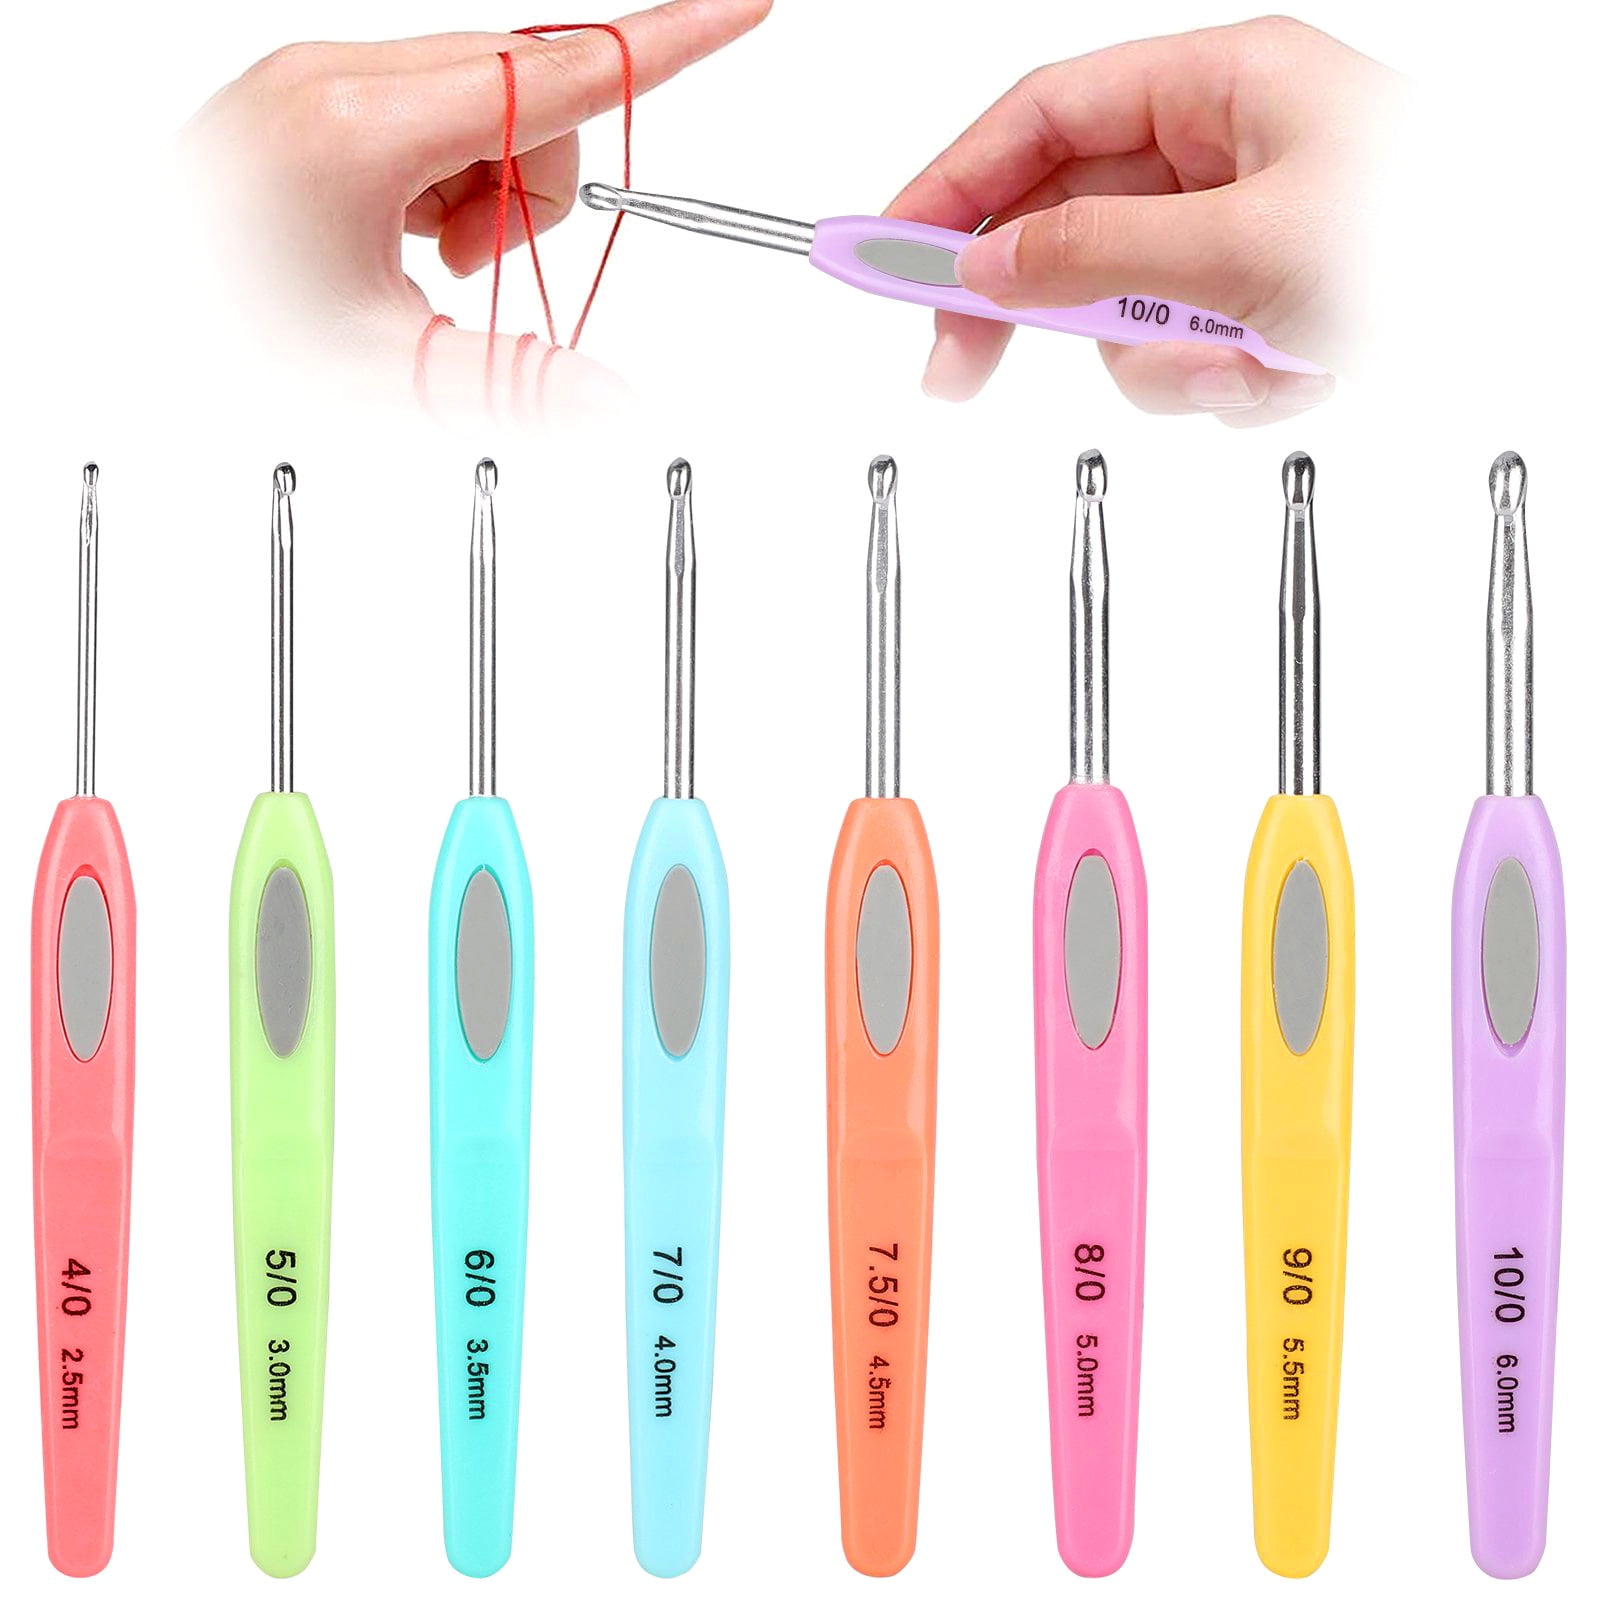 8pcs Crochet Hooks Metal Crochet Hooks Crochet Hook Sets with Case